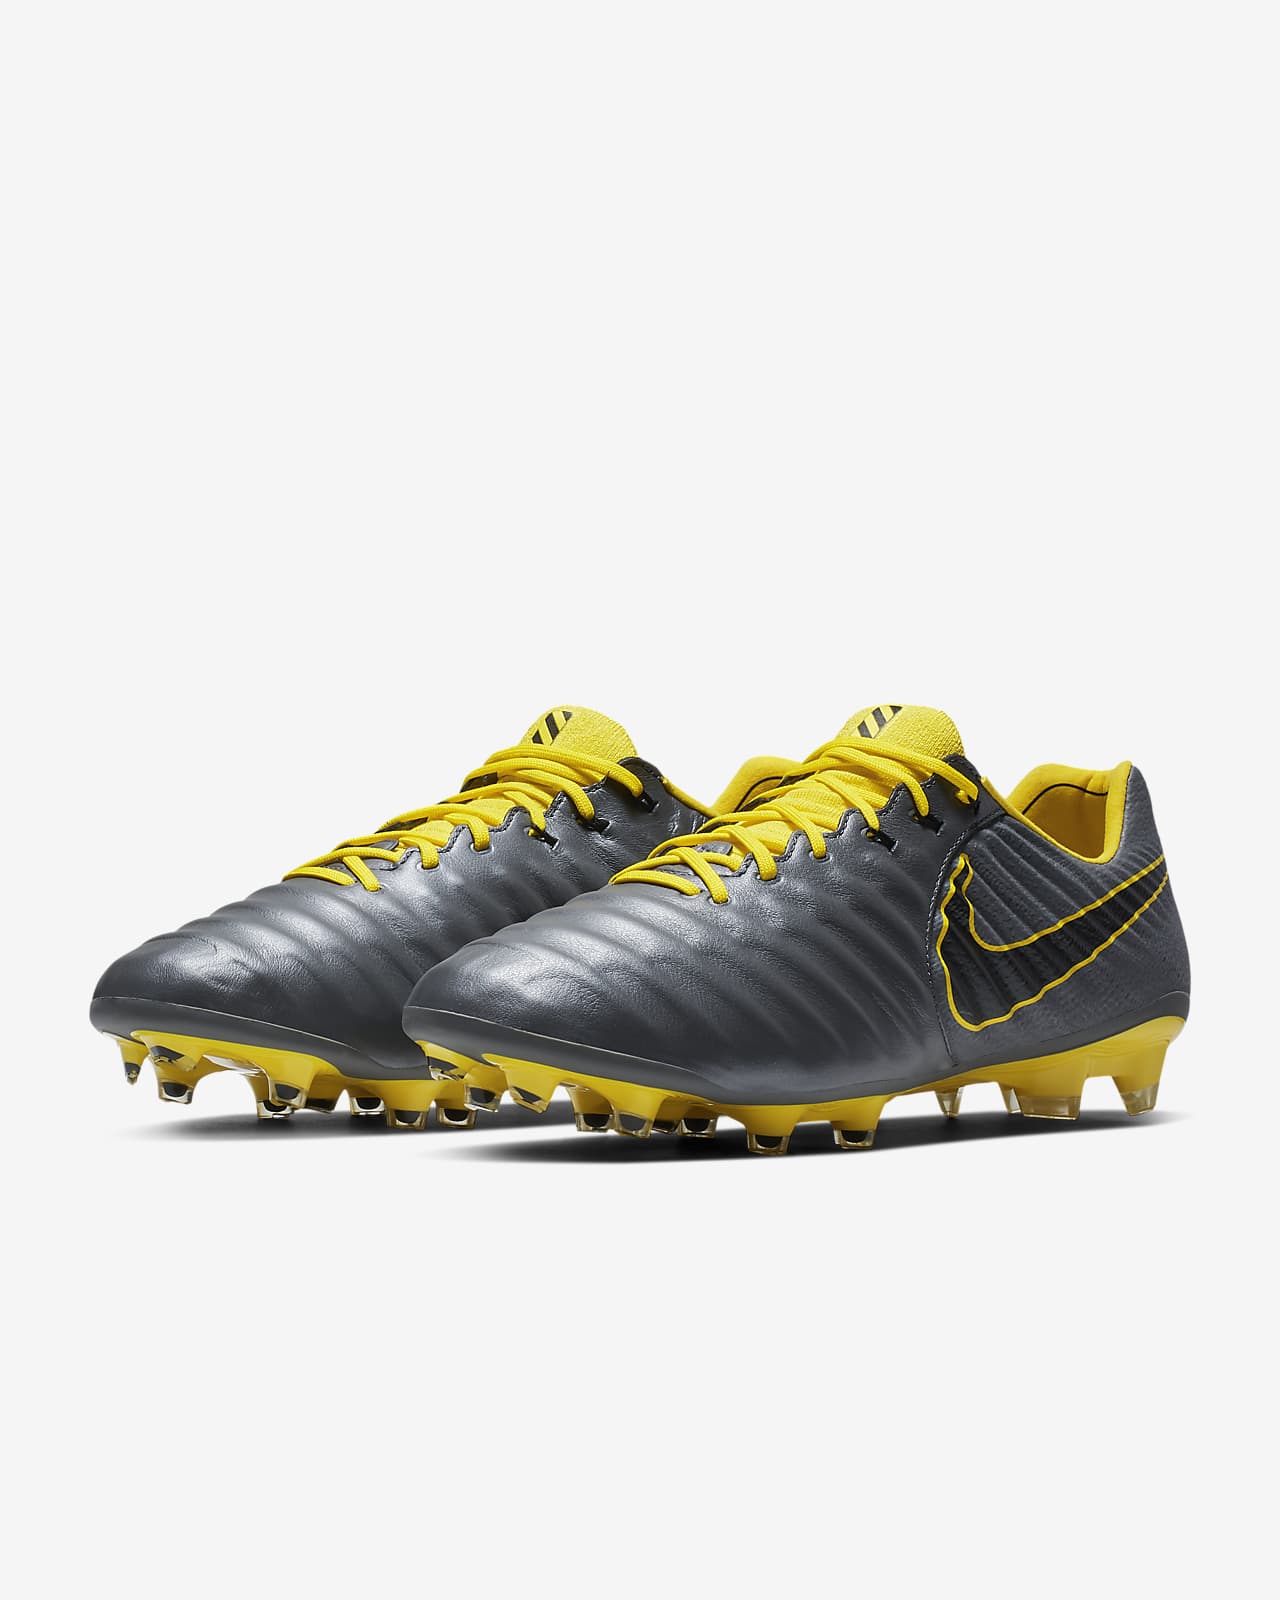 Nike Legend 7 Elite FG Game Over Firm-Ground Soccer Cleat. Nike.com